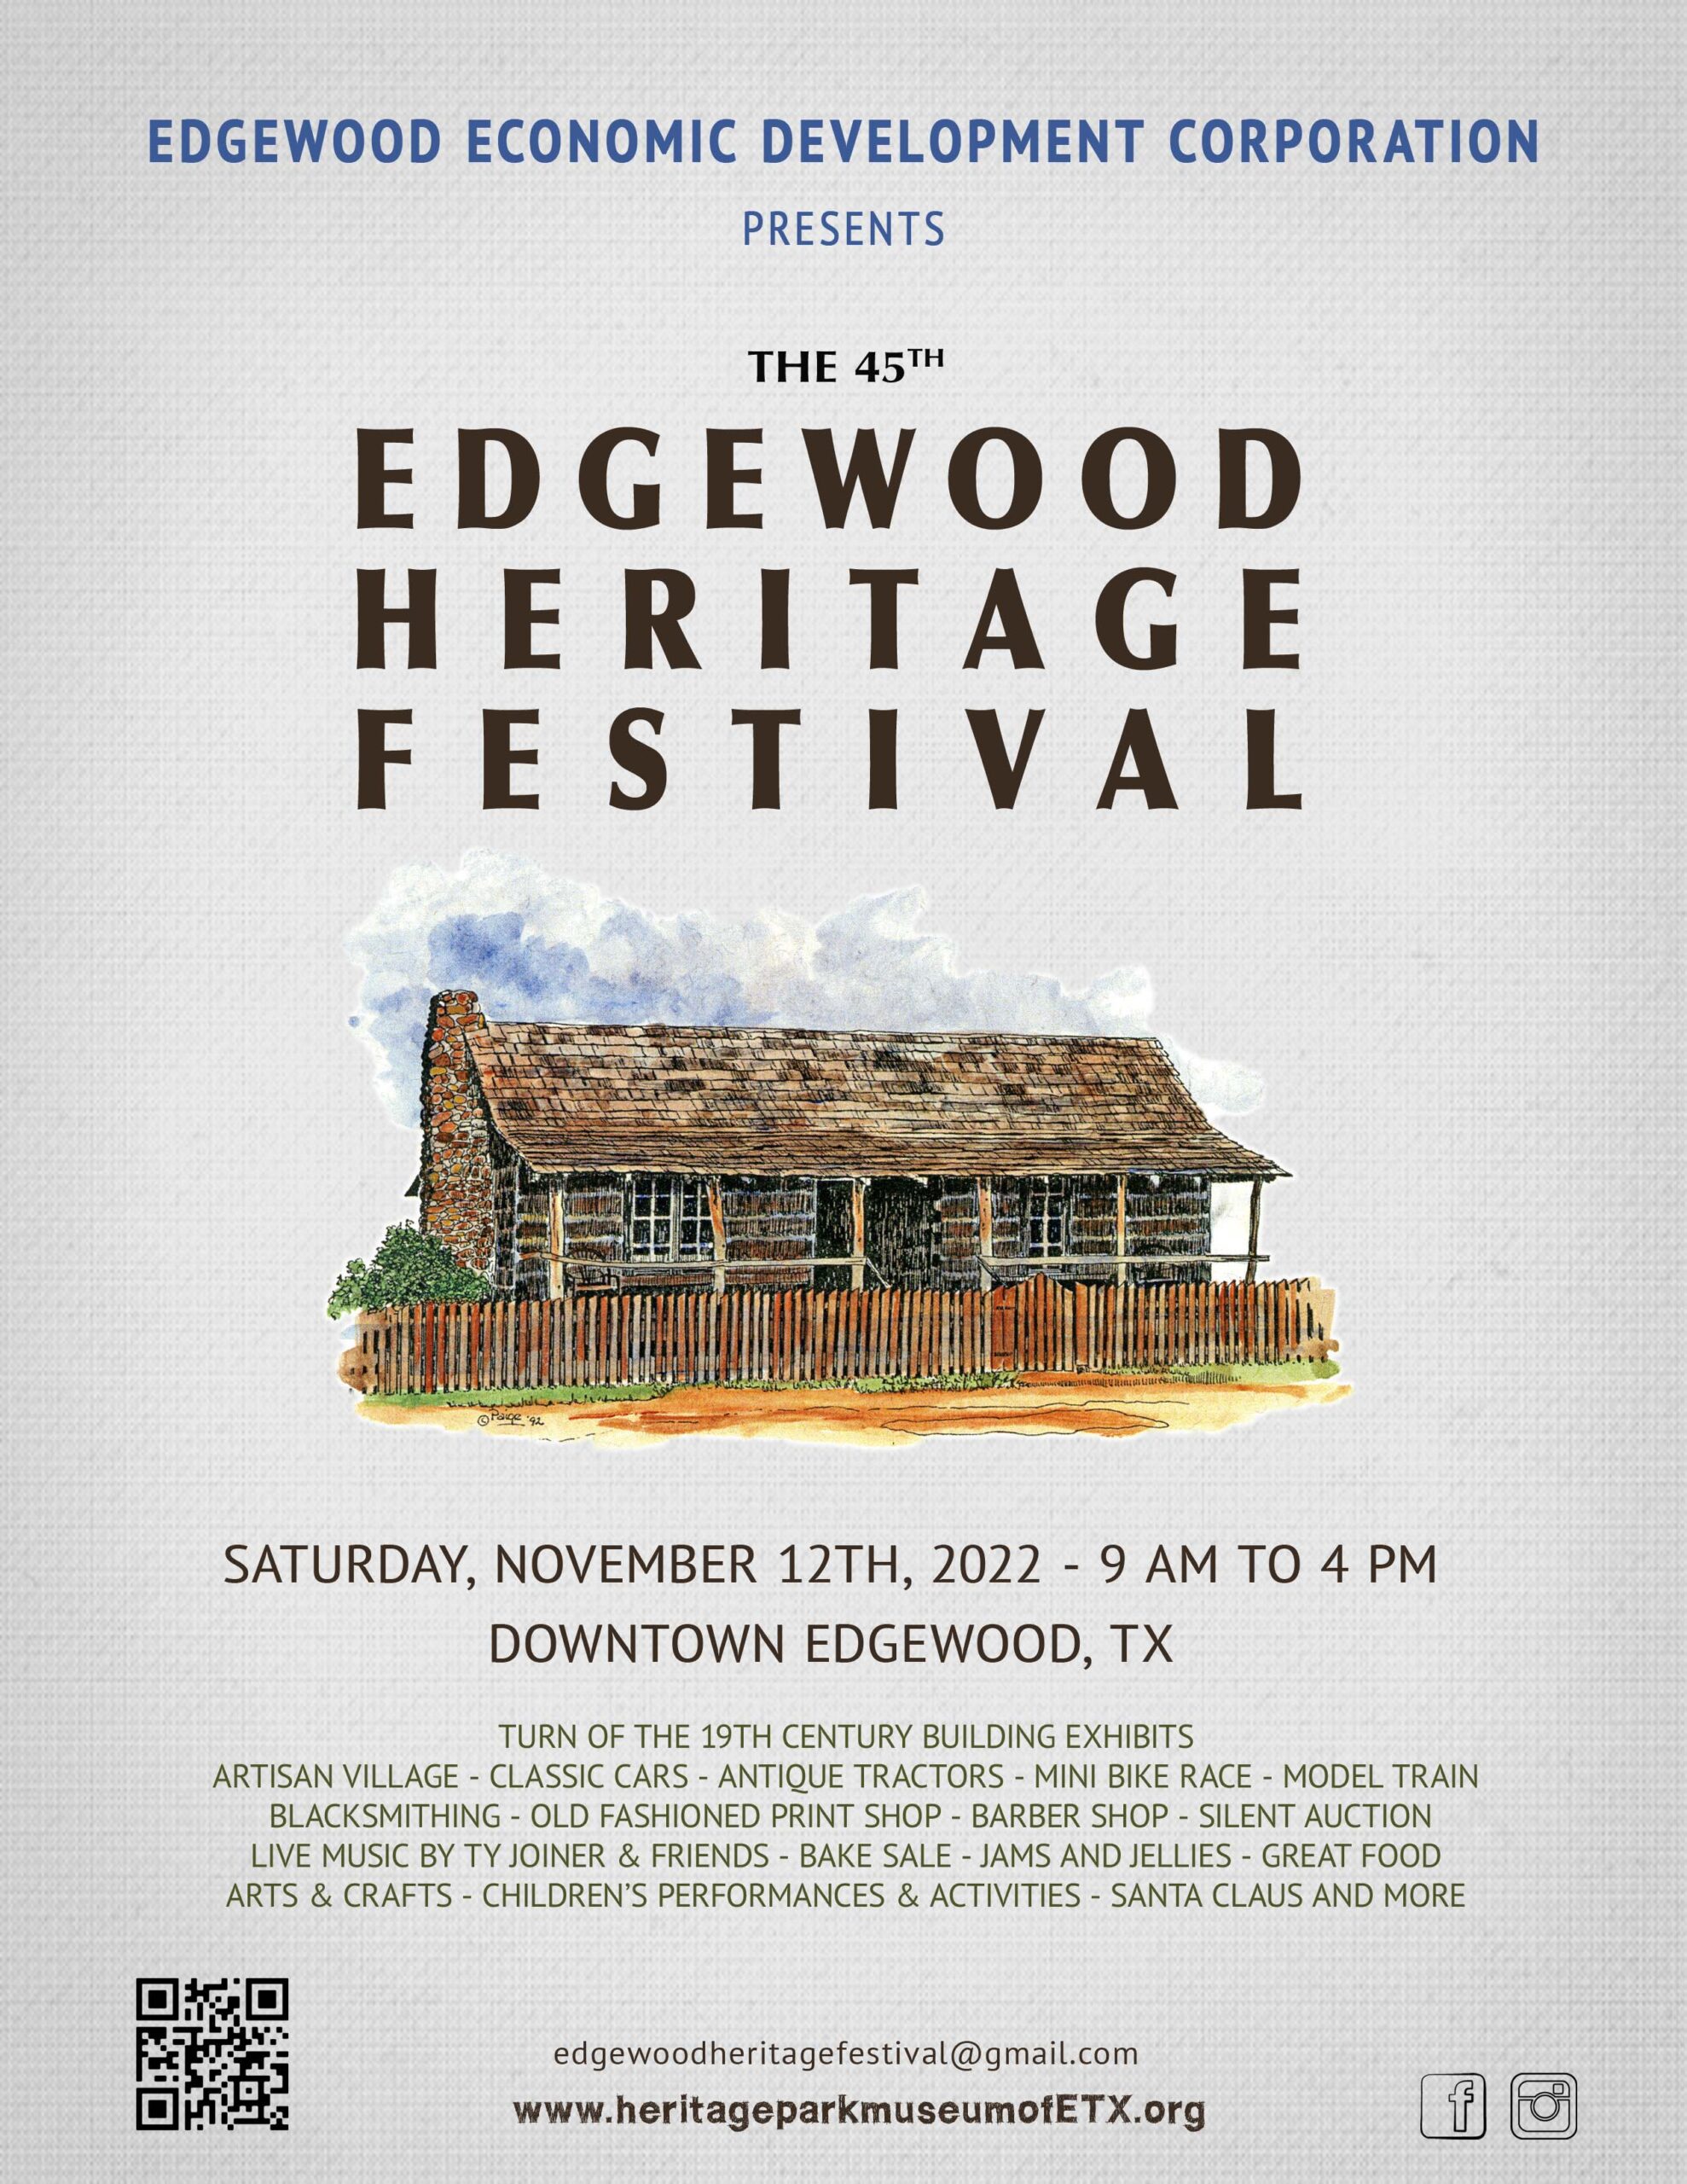 Edgewood Heritage Festival Preserving the past for the future